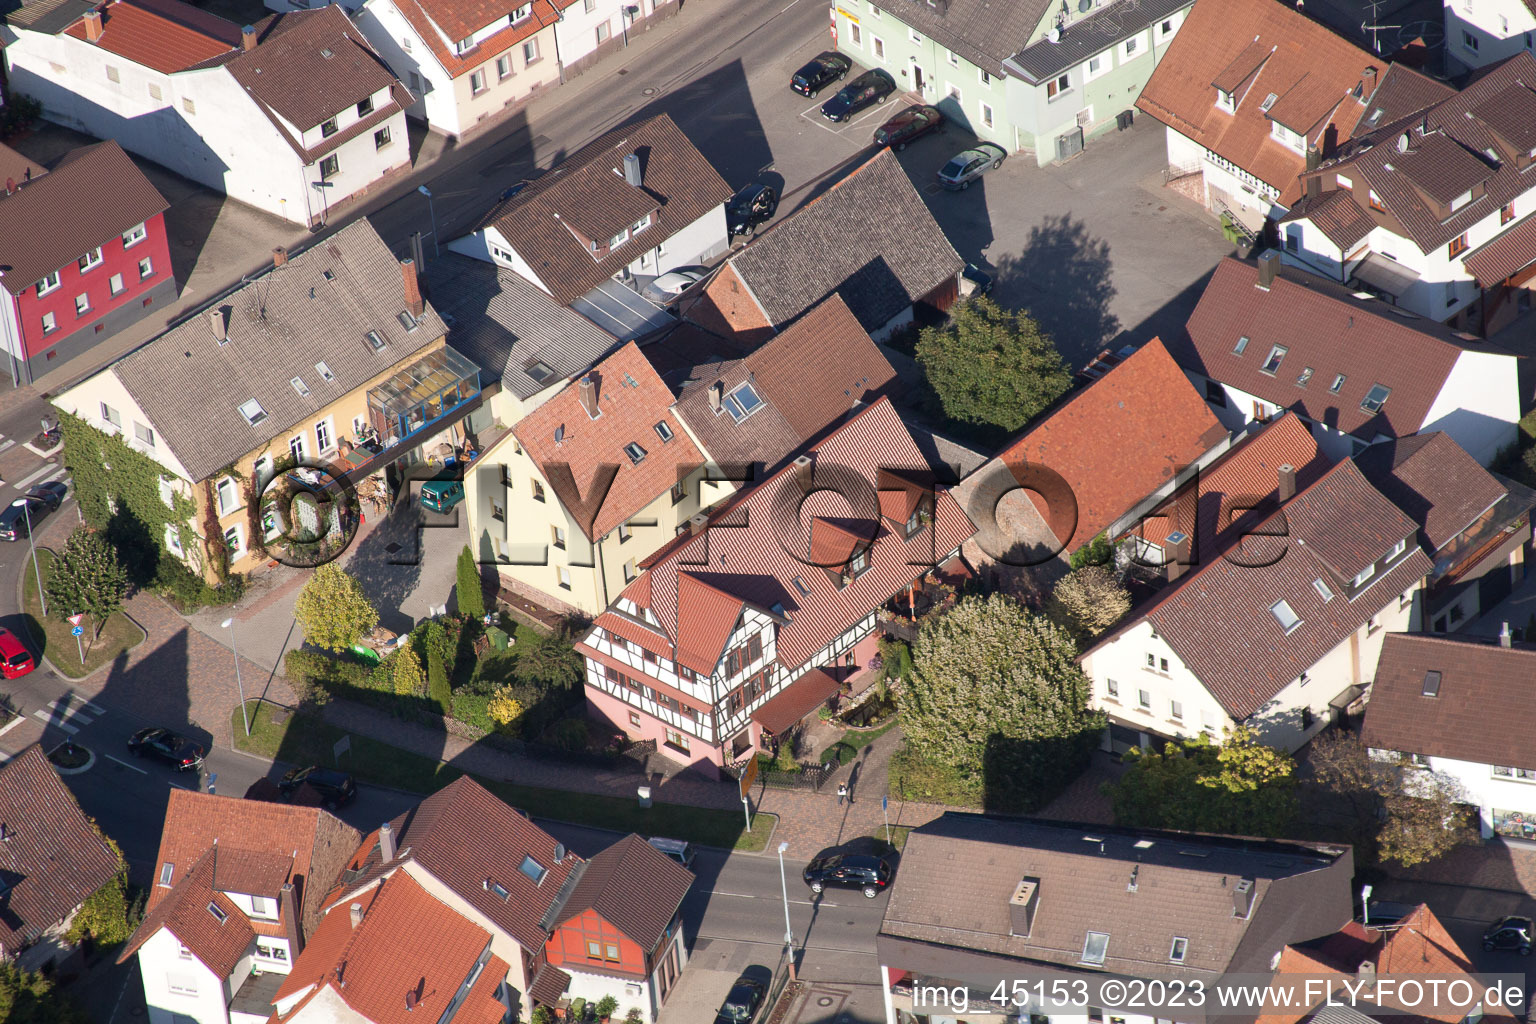 Drone image of Hauptstr in the district Langensteinbach in Karlsbad in the state Baden-Wuerttemberg, Germany